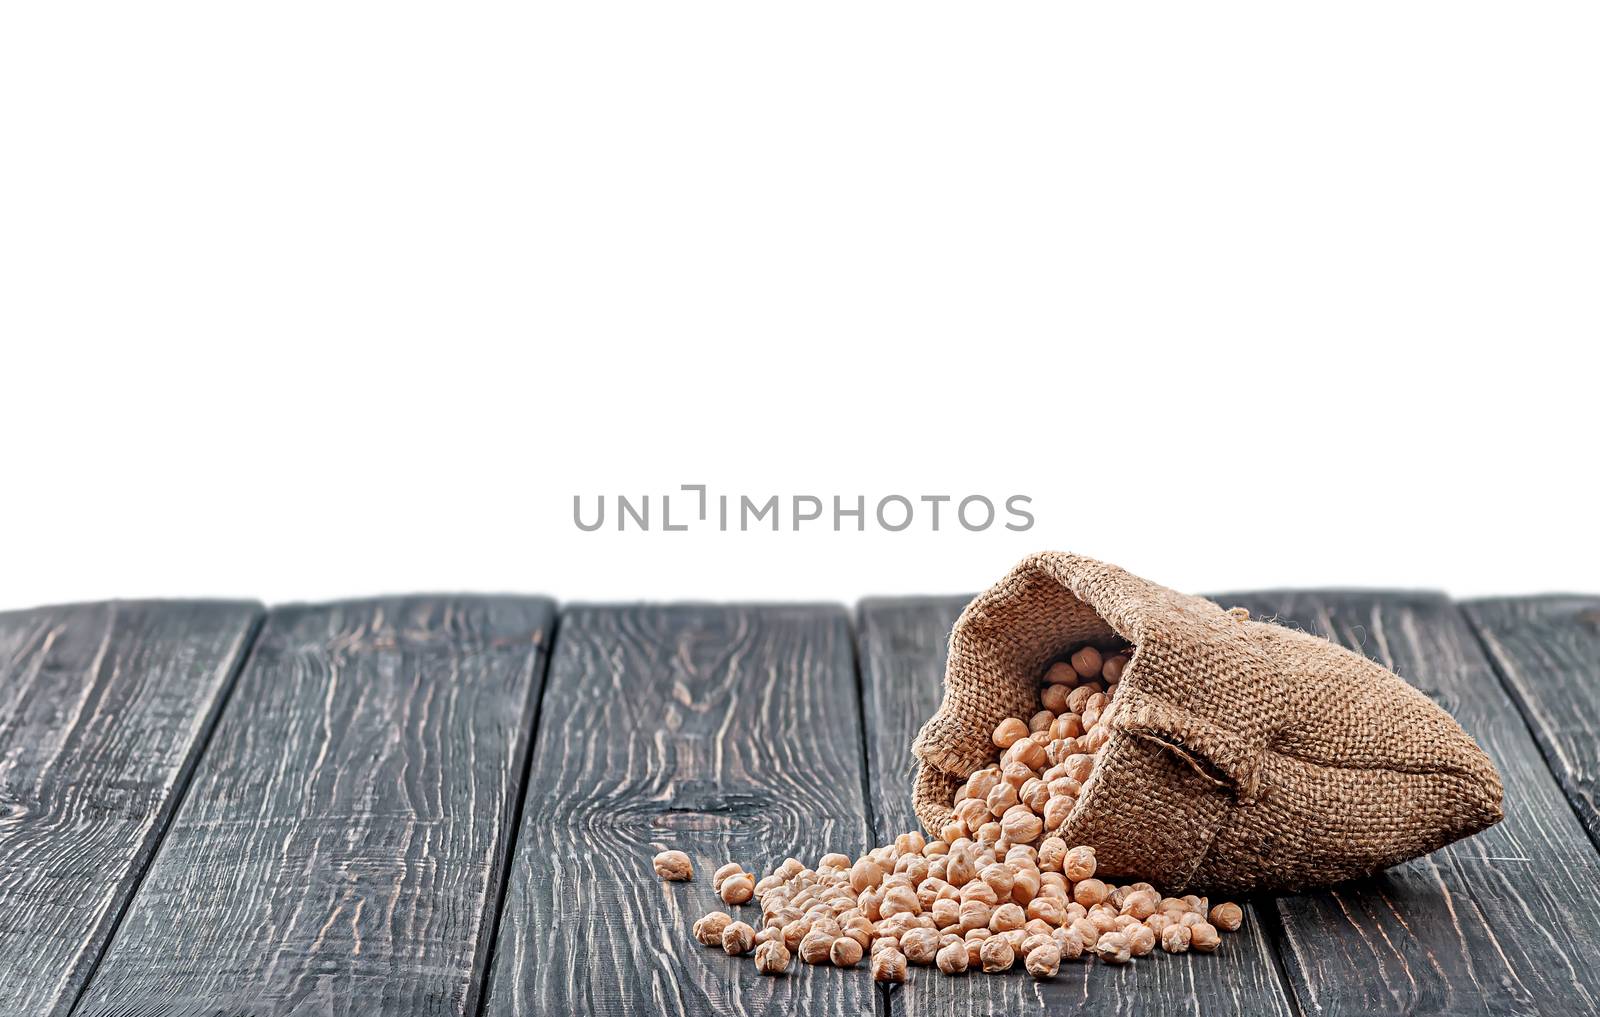 Chickpea spill out of the bag on table isolated on white background